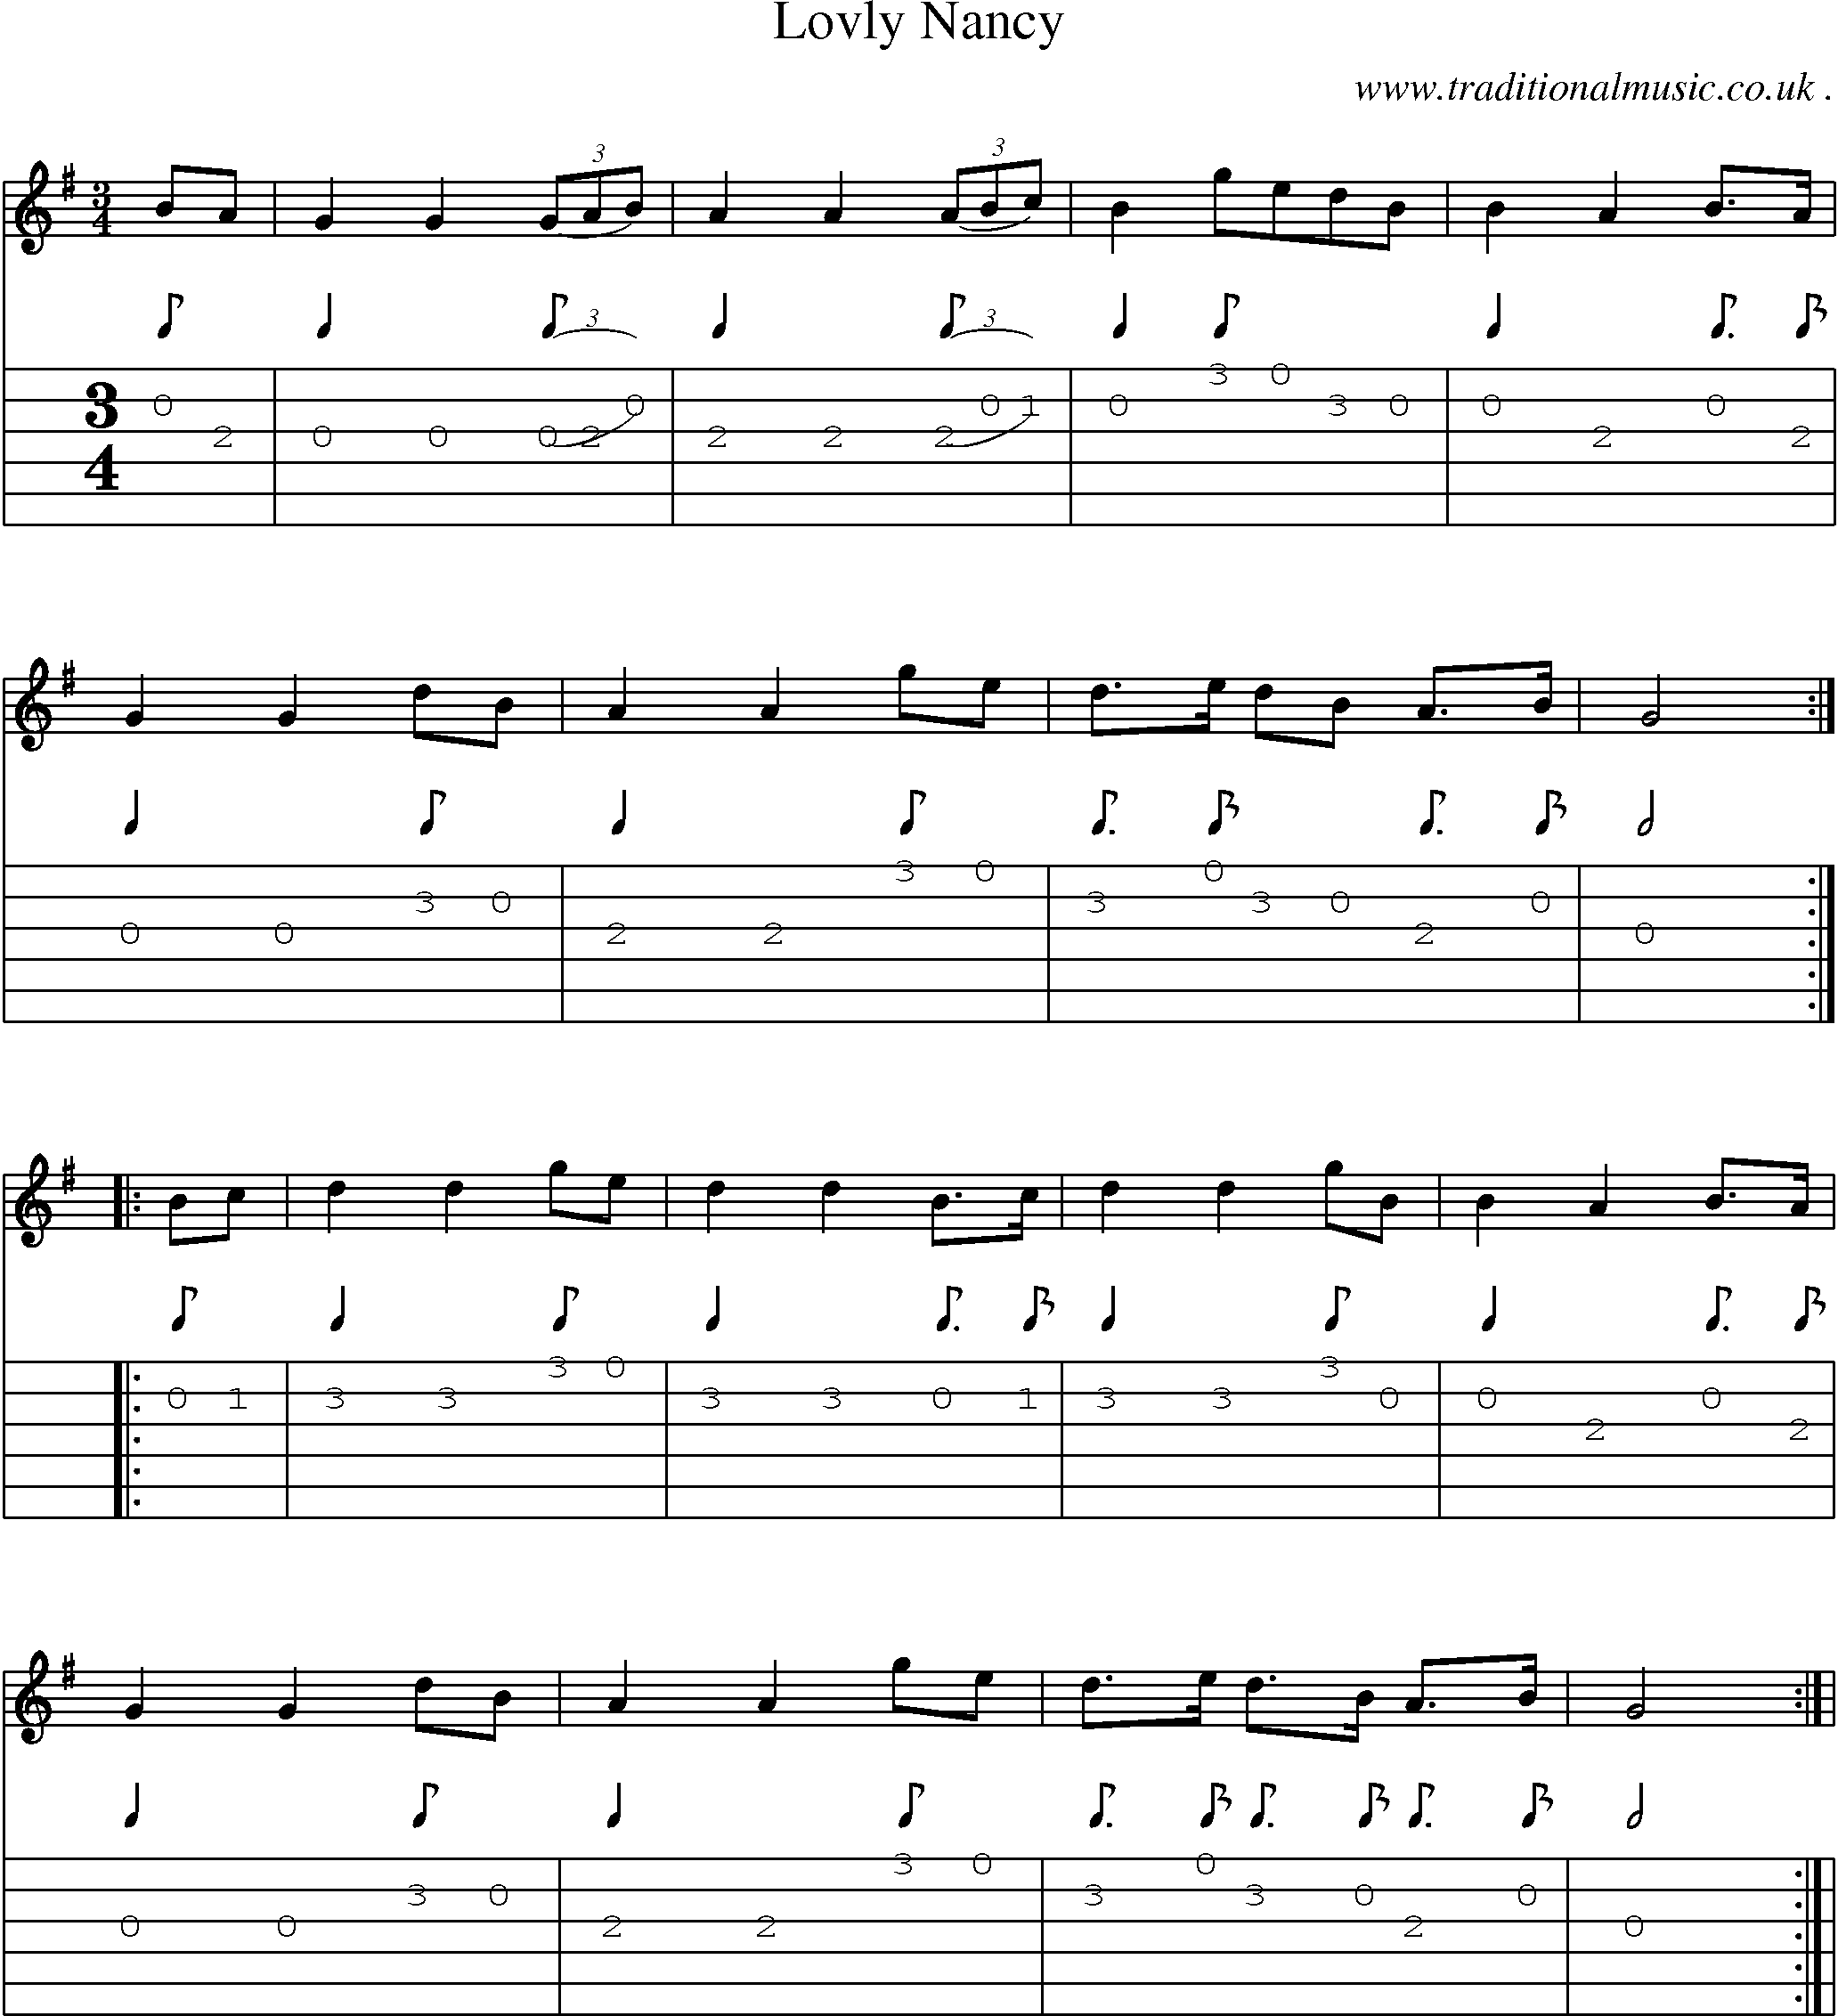 Sheet-Music and Guitar Tabs for Lovly Nancy